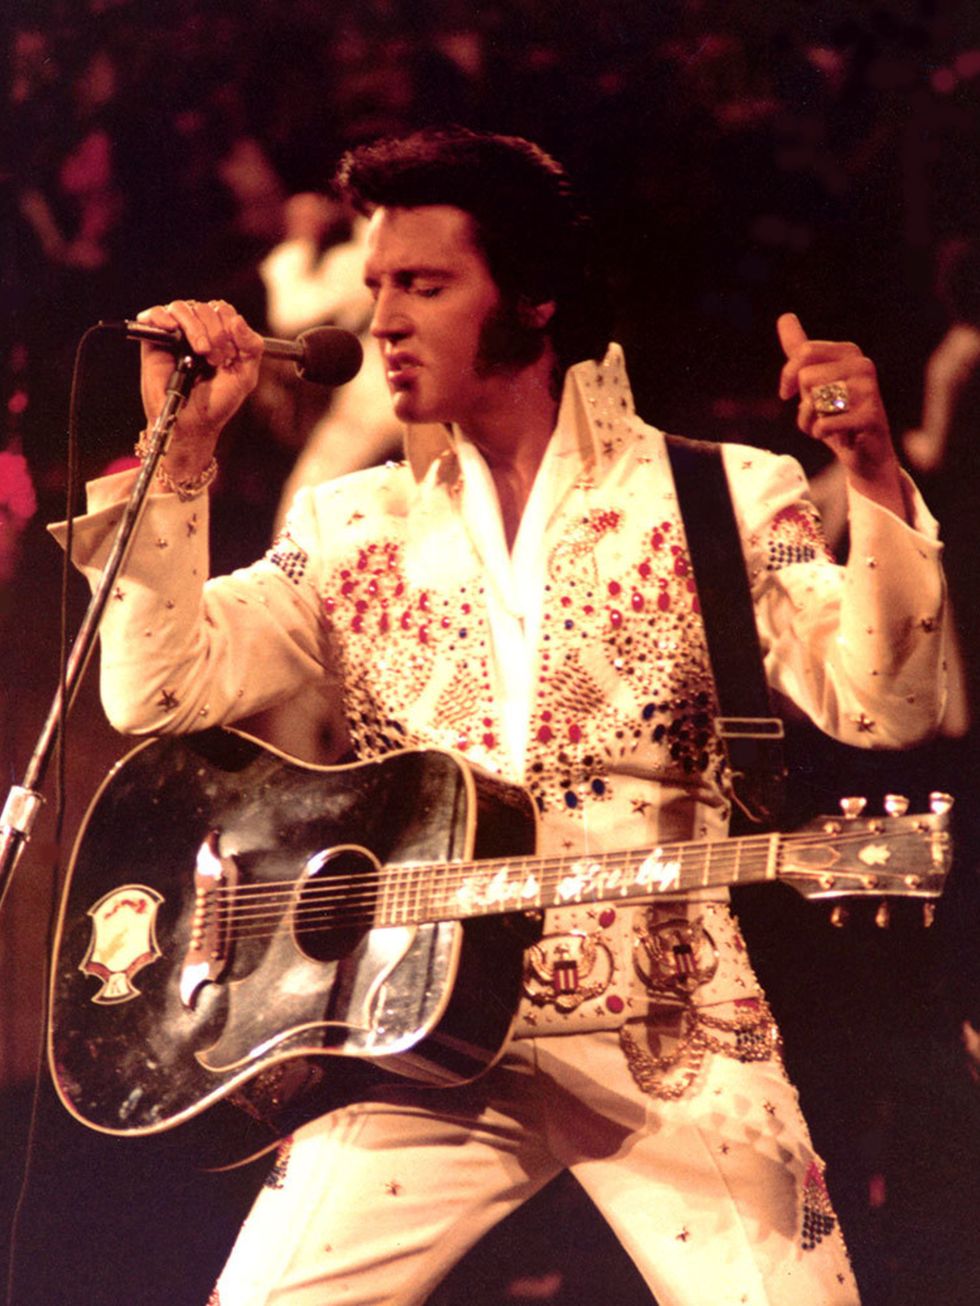 <p><strong>EXHIBITION: Elvis Exhibition @ the O2</strong></p>

<p>The King is back. Kind of, anyway. Showcasing over 300 artifacts direct from the Graceland archives, this comprehensive exhibition chronicles the rise and rise of the King of Rock n Roll f